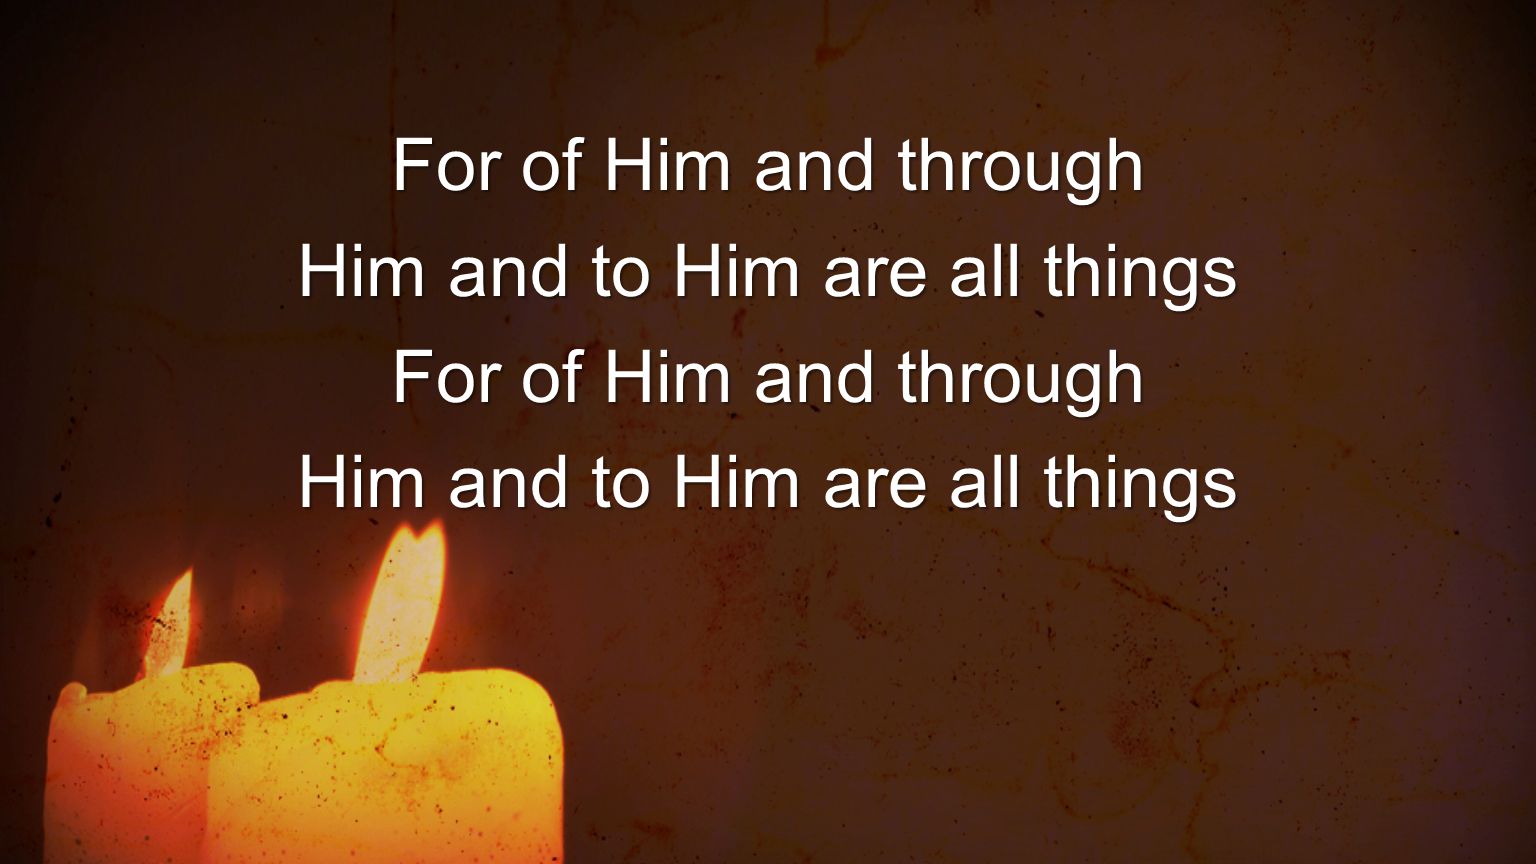 For of Him and through Him and to Him are all things